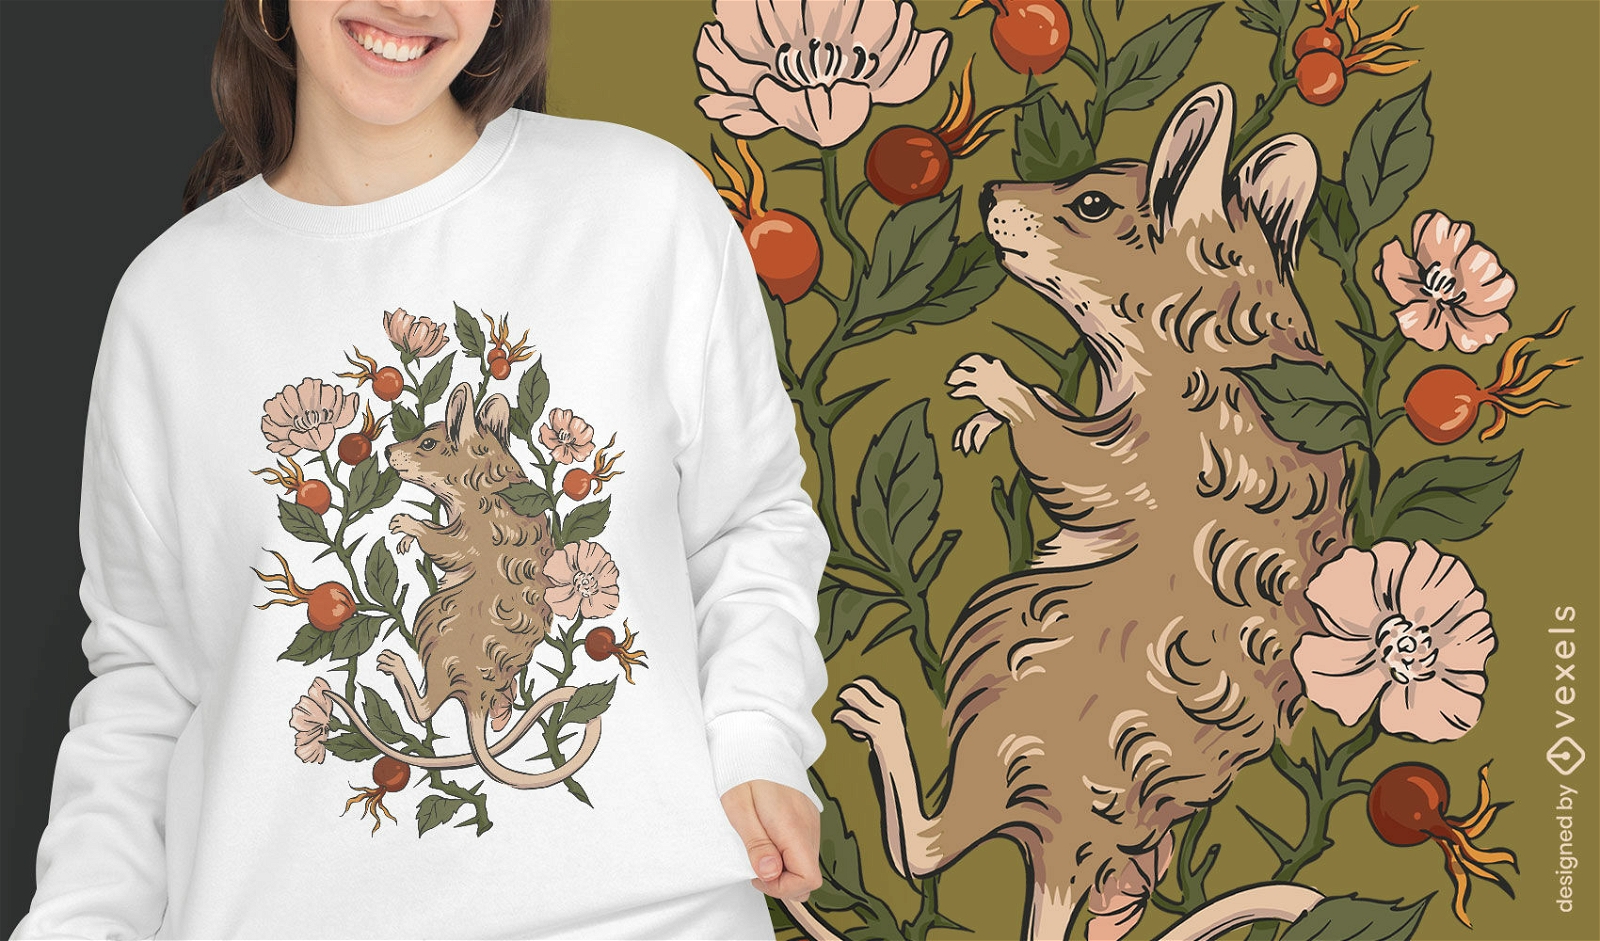 Country mouse floral t-shirt design